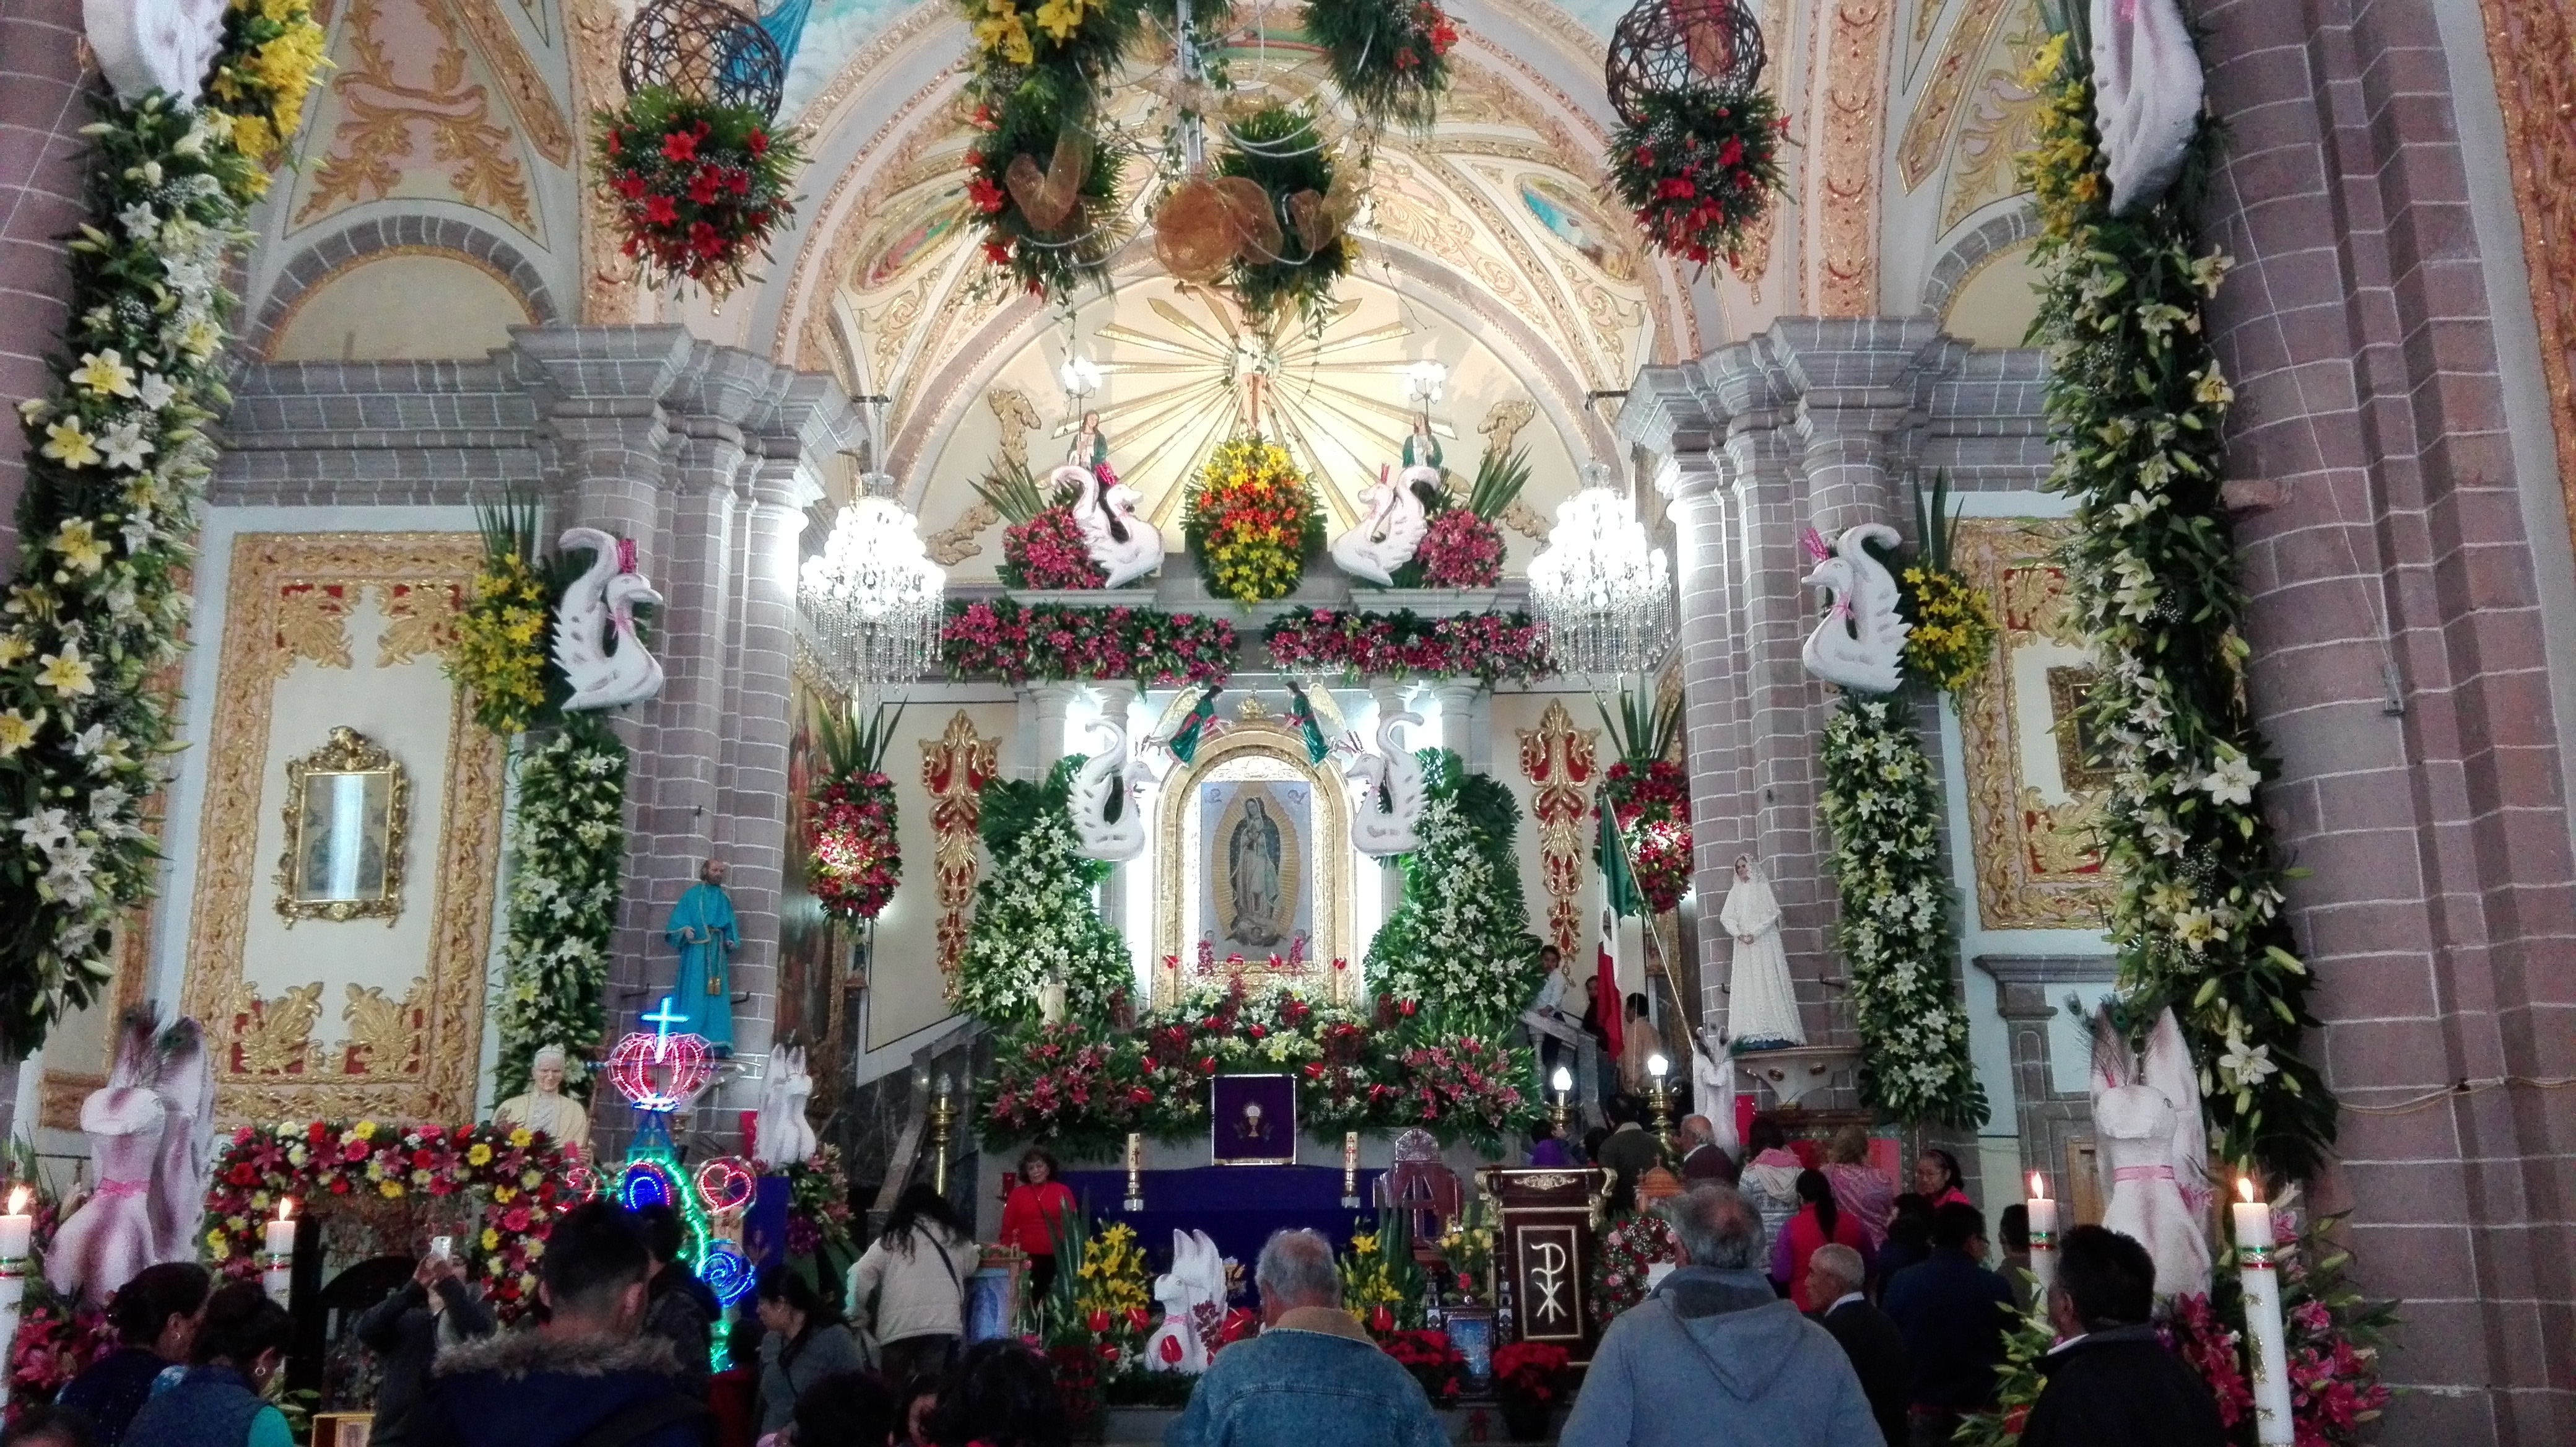 The Day of the Virgin Guadalupe